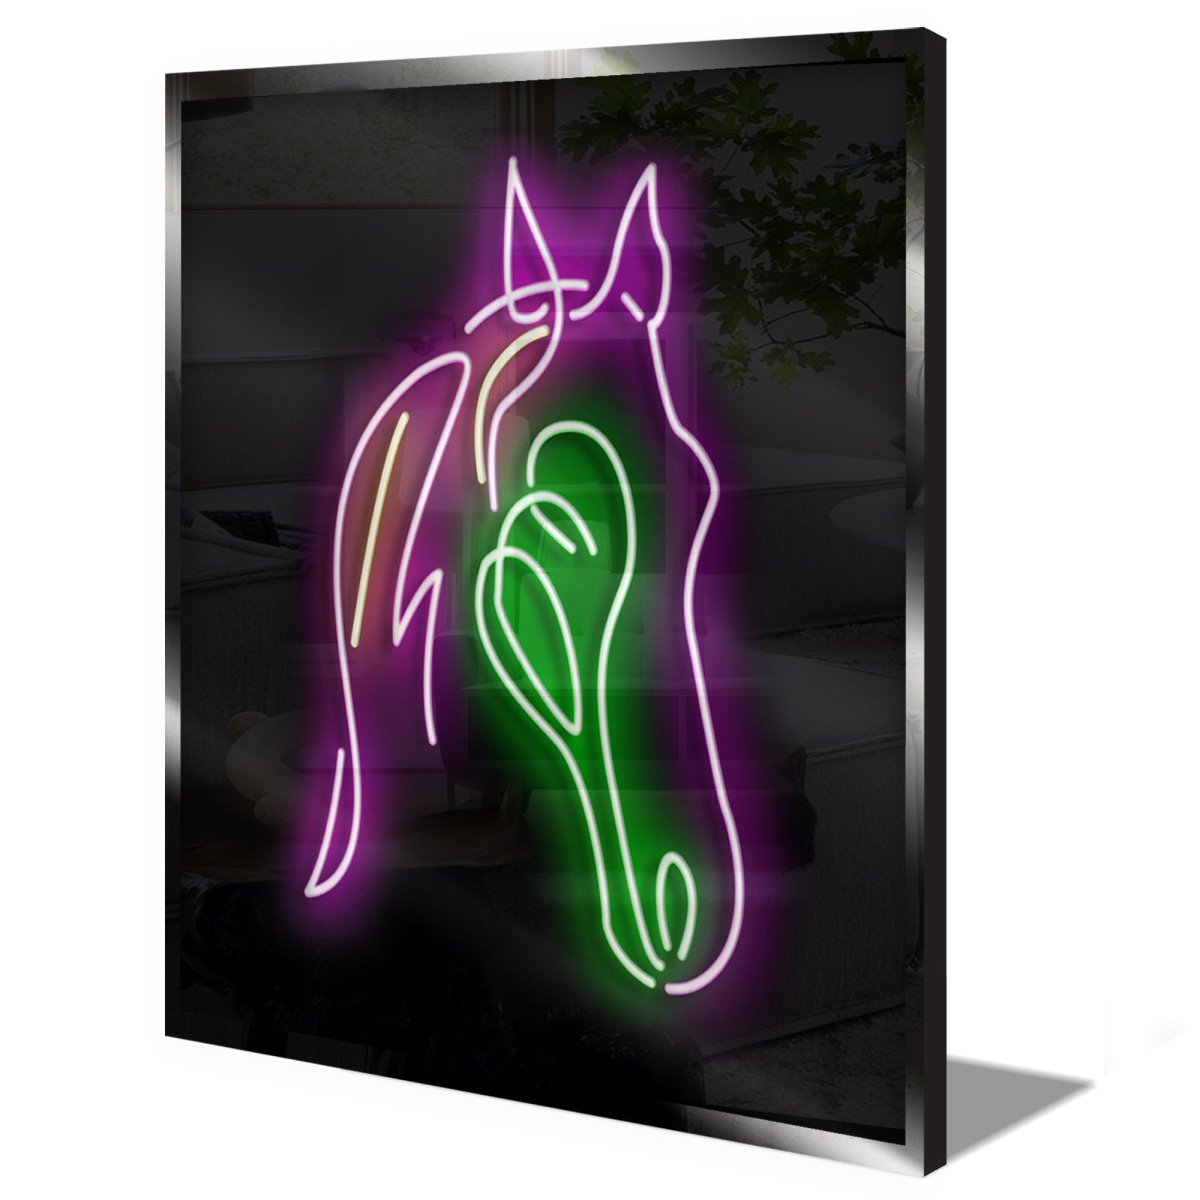 Personalised LED Neon Sign HORSE - madaboutneon